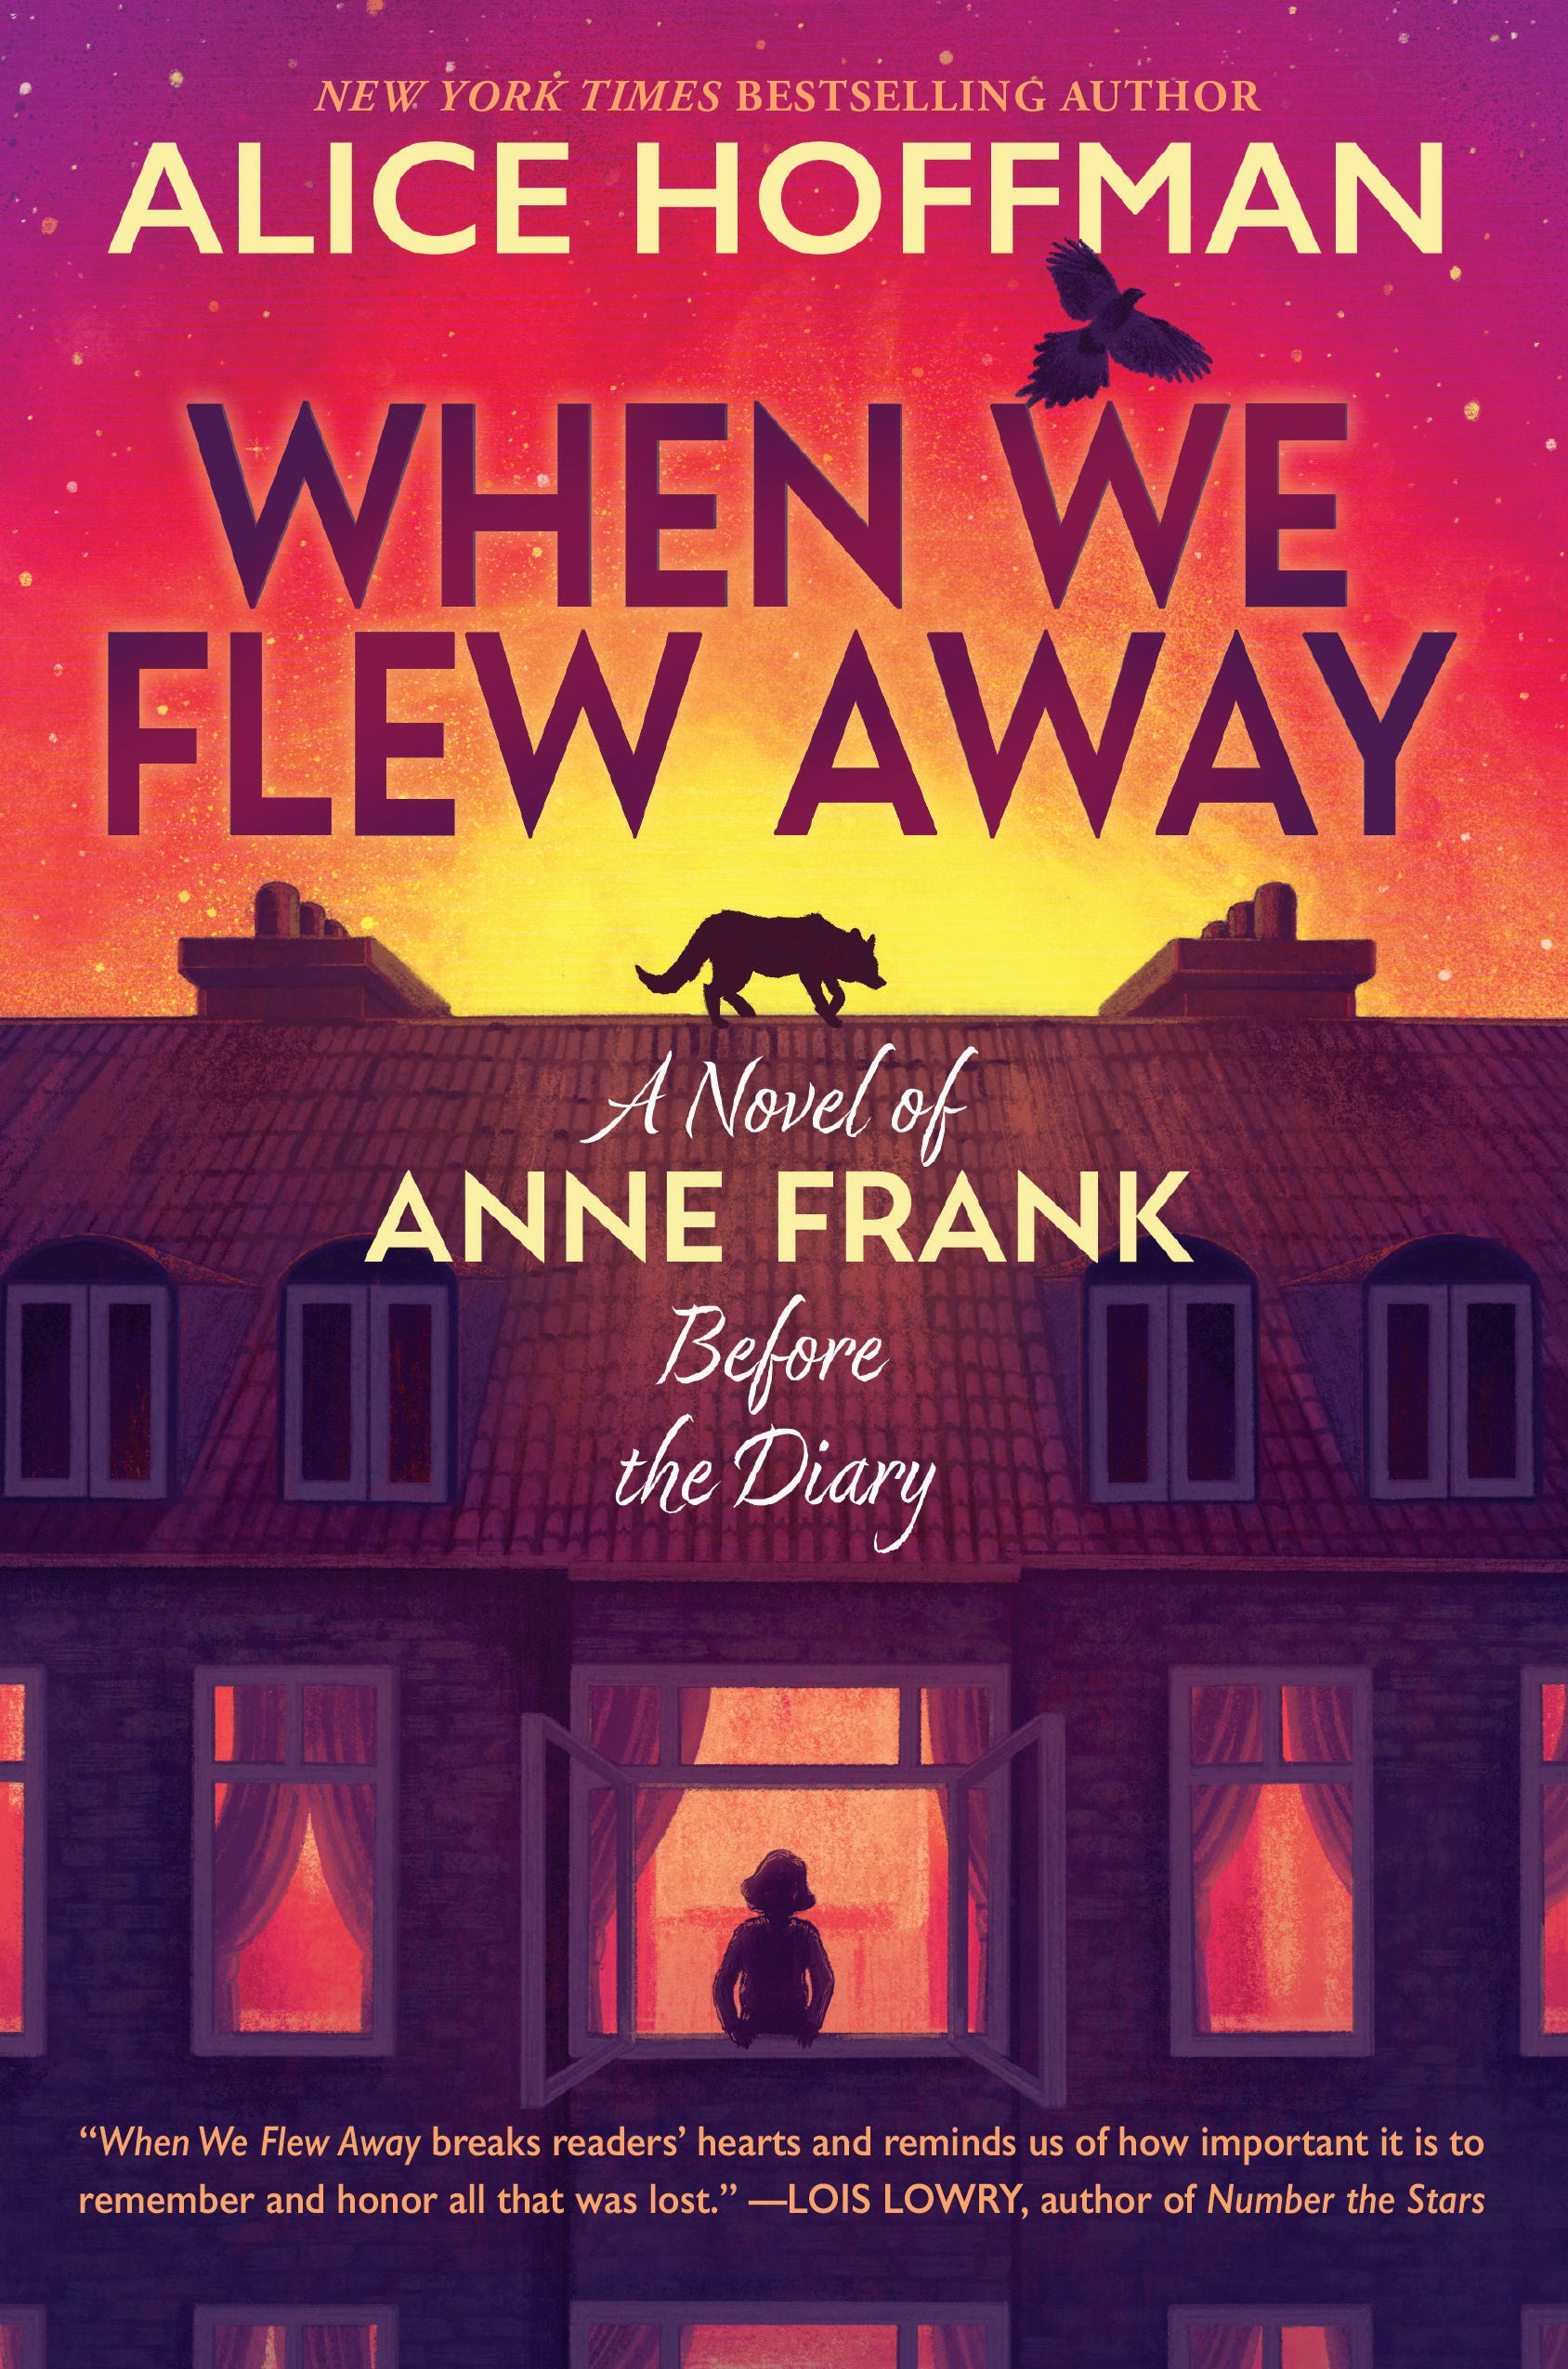 “When We Flew Away: A Novel of Anne Frank Before the Diary,” by Alice Hoffman.